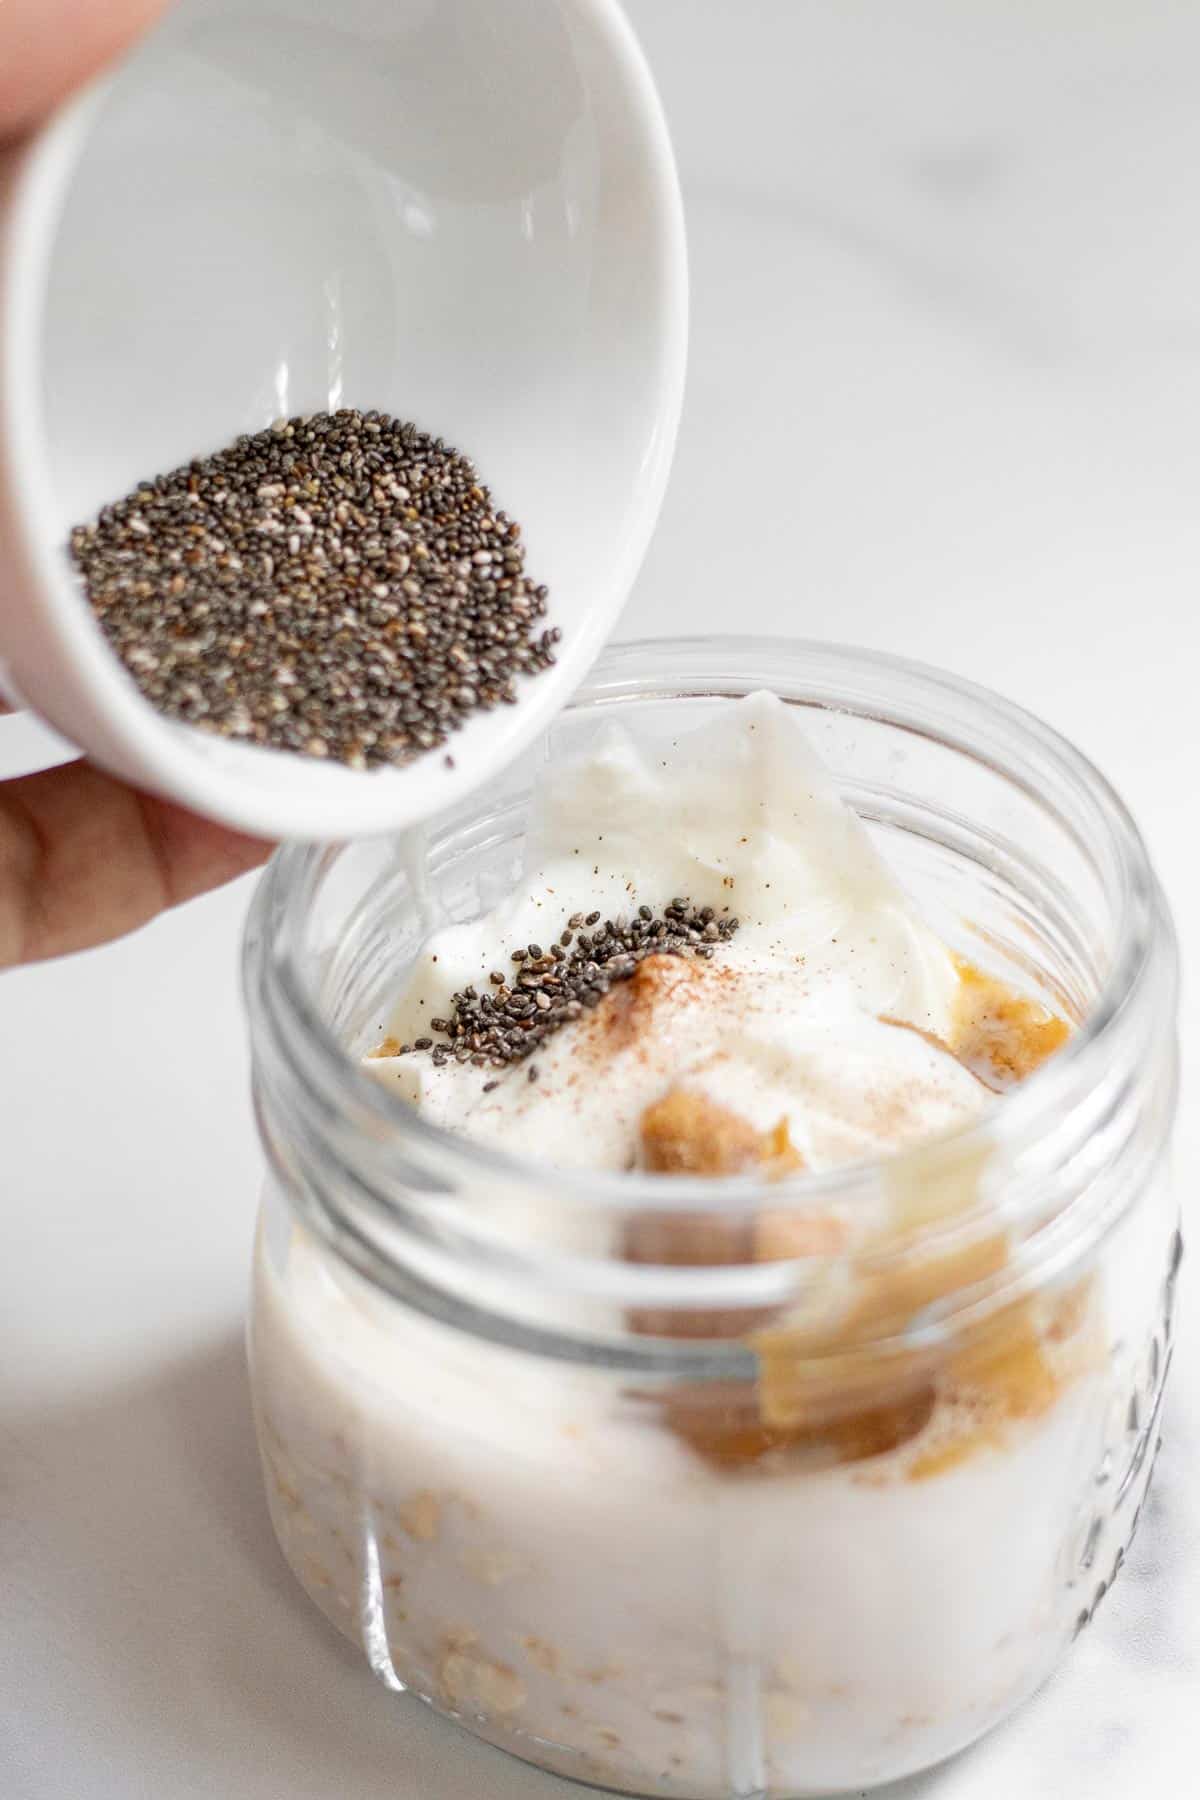 Pouring chia seeds into a 12 oz jar that contains the other ingredients for overnight oats with protein powder.